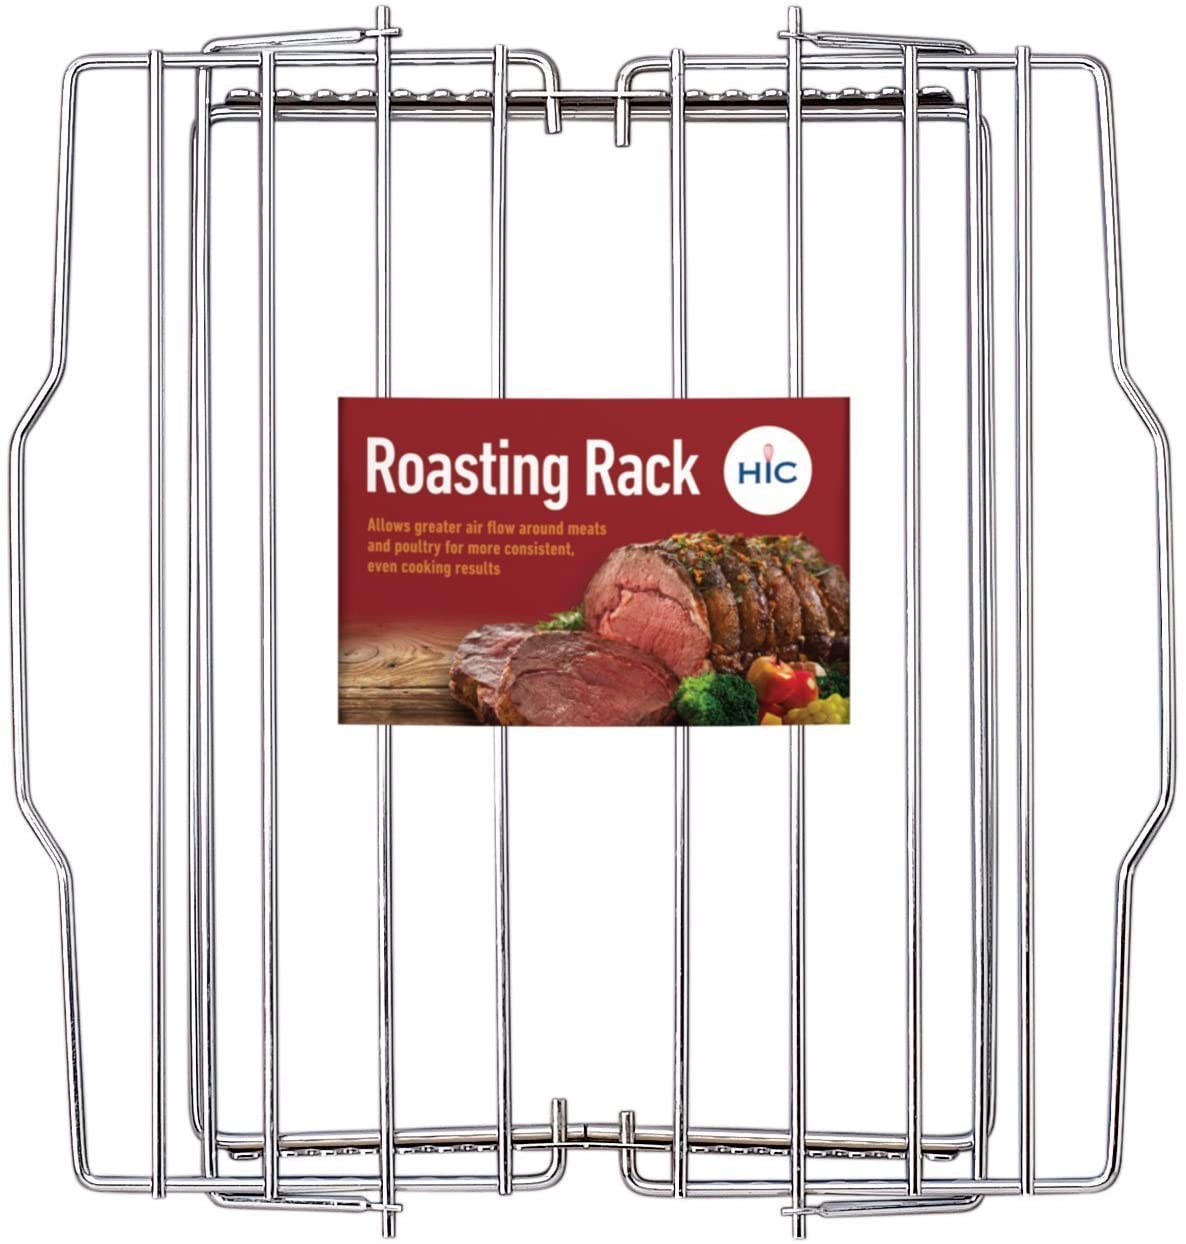 HIC Harold Import Co. Adjustable Baking Broiling Roasting Racks, Chrome Plated Steel Wire